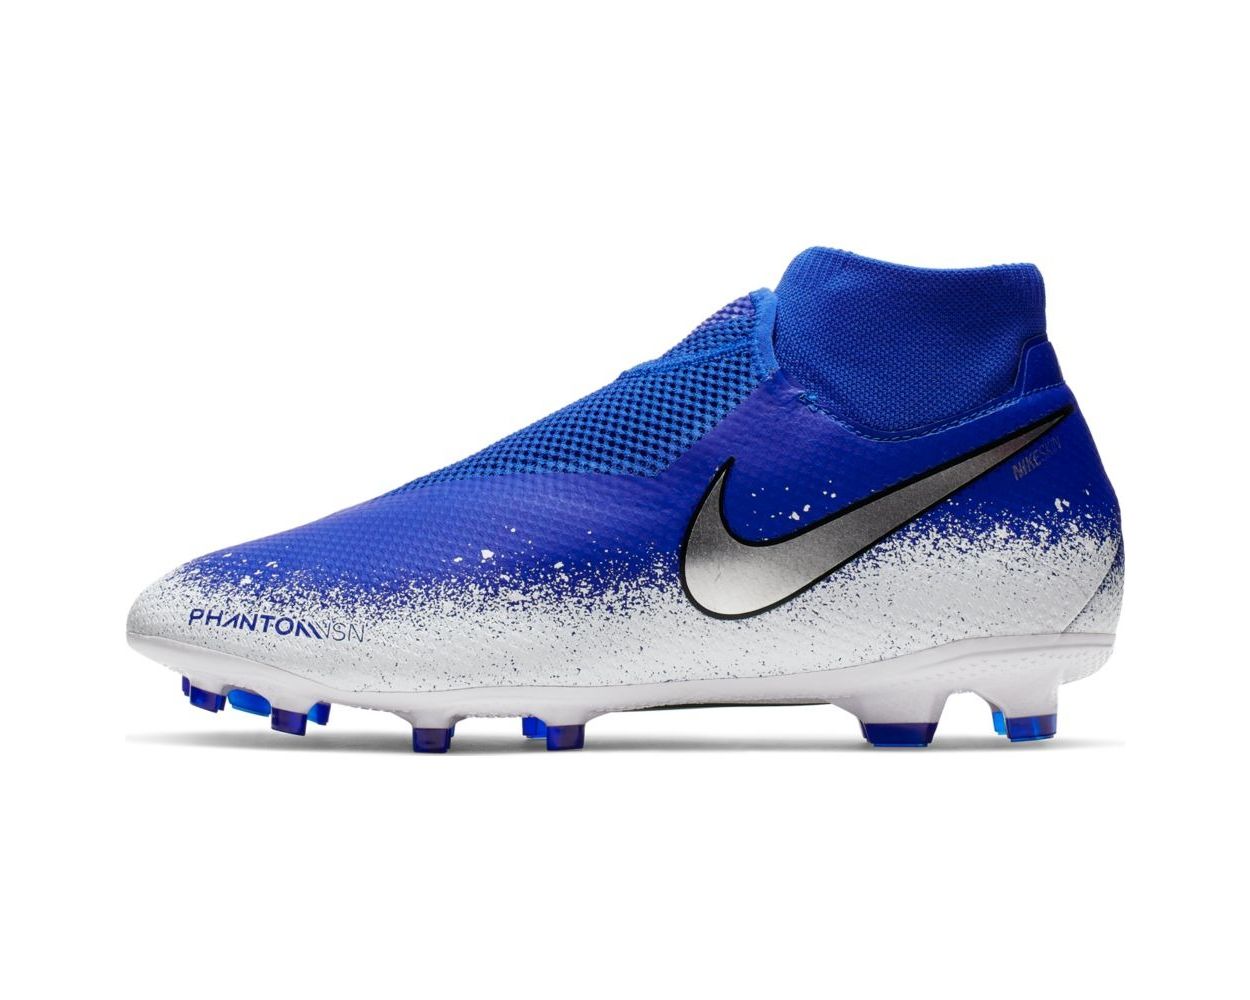 Nike Phantom Vision Pro Dynamic Fit Firm Ground Soccer Cleats Mens ...